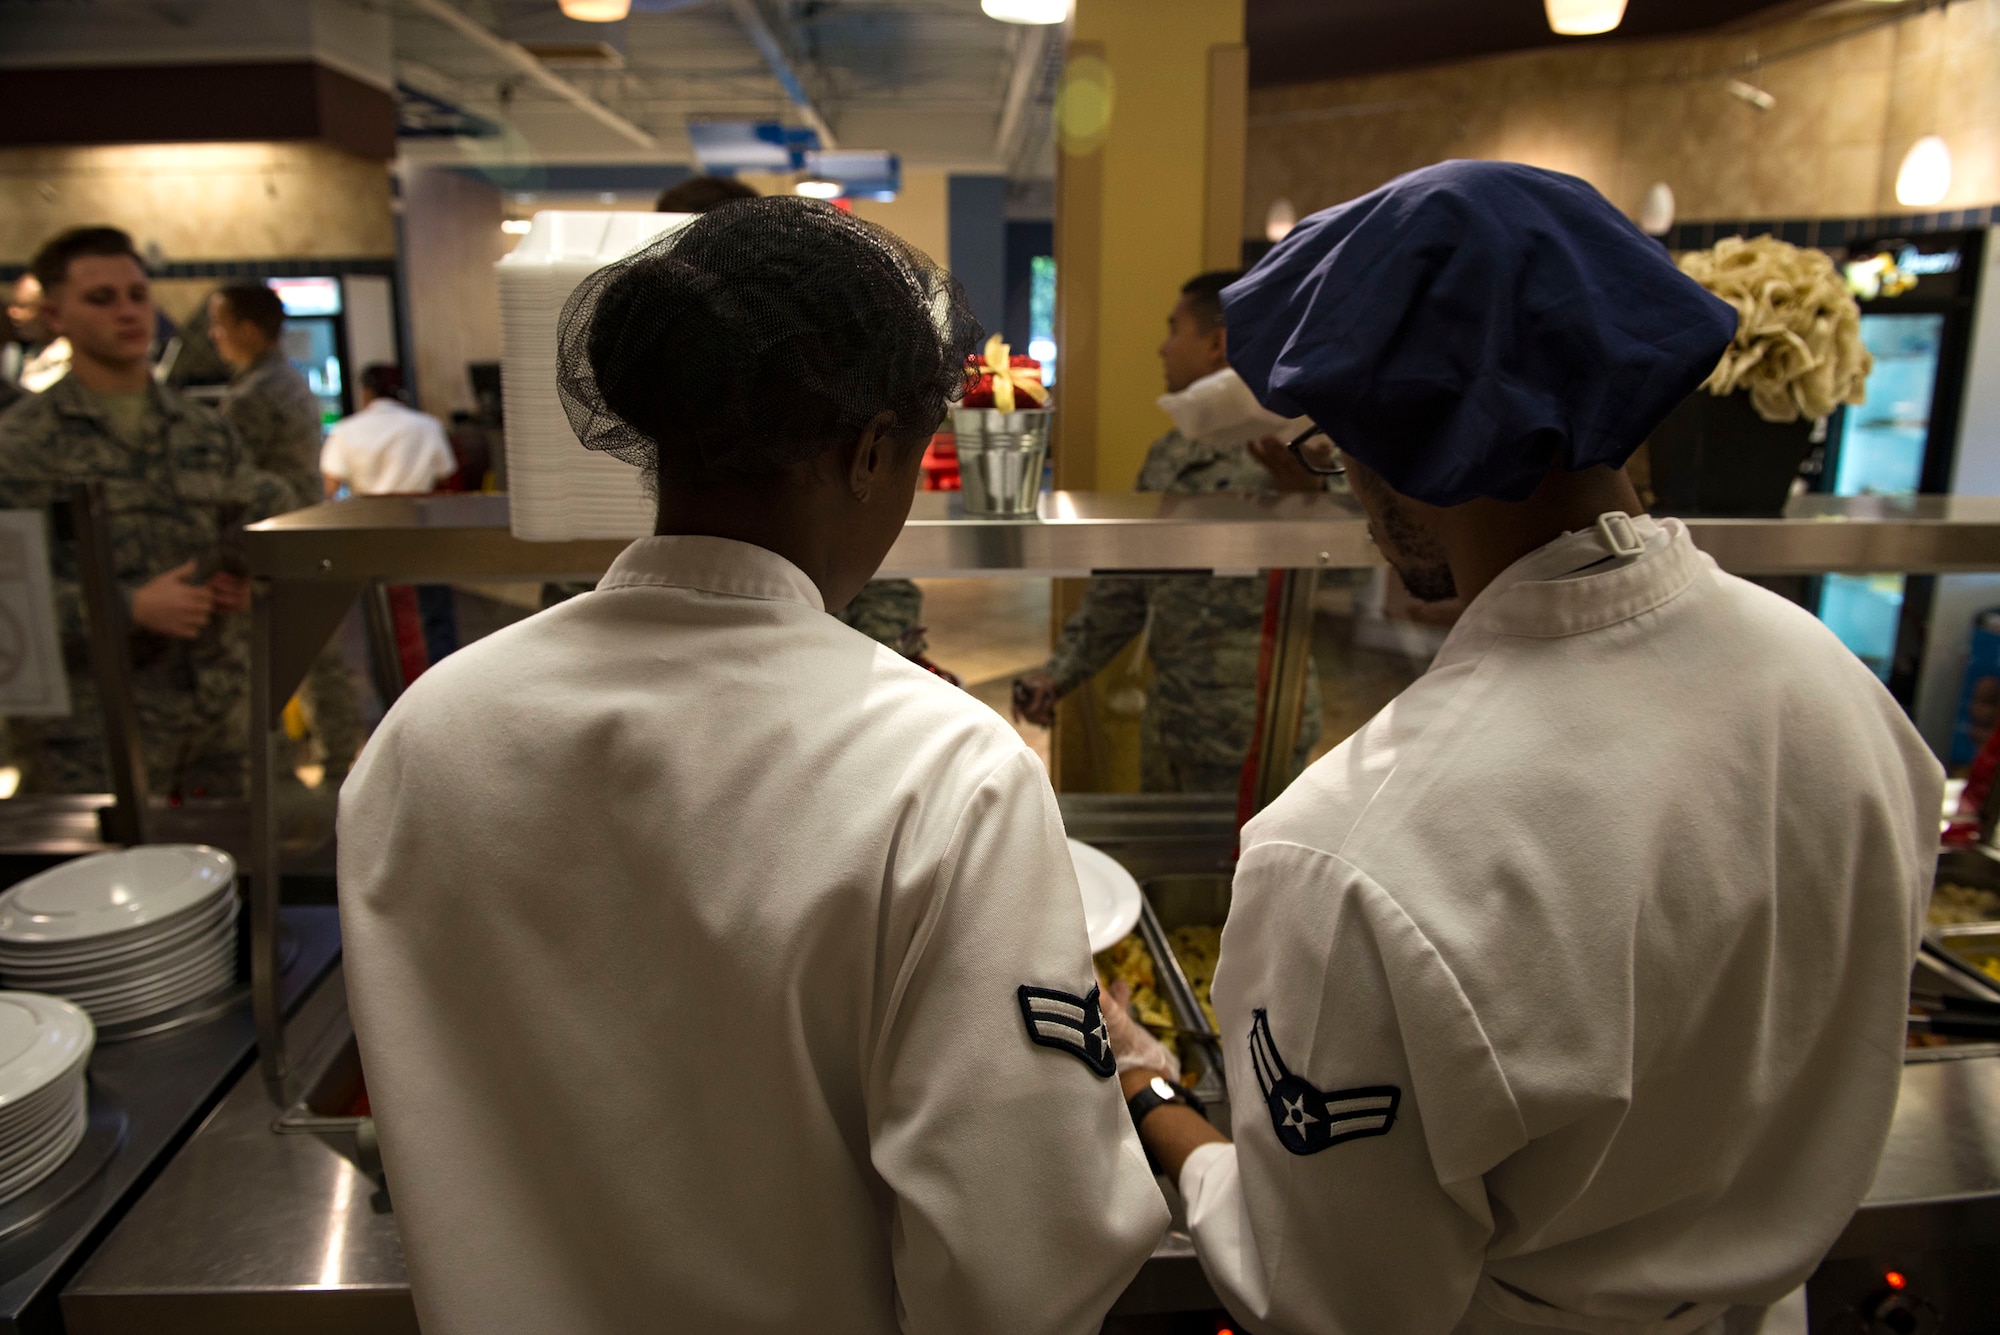 Airman 1st Class Ravin Collins, left, 23d Force Support Squadron food services journeyman, and Airman 1st Class Keven Fears, 23d FSS food services specialist, serve Airmen during lunch in the Georgia Pines Dining Facility (DFAC), Dec. 12, 2017, at Moody Air Force Base, Ga. Through teamwork, adaption and striving for excellence, the Georgia Pines DFAC Airmen are able to ensure Team Moody is fed and ready to finish the fight. (U.S. Air Force Base photo by Airman 1st Class Erick Requadt)